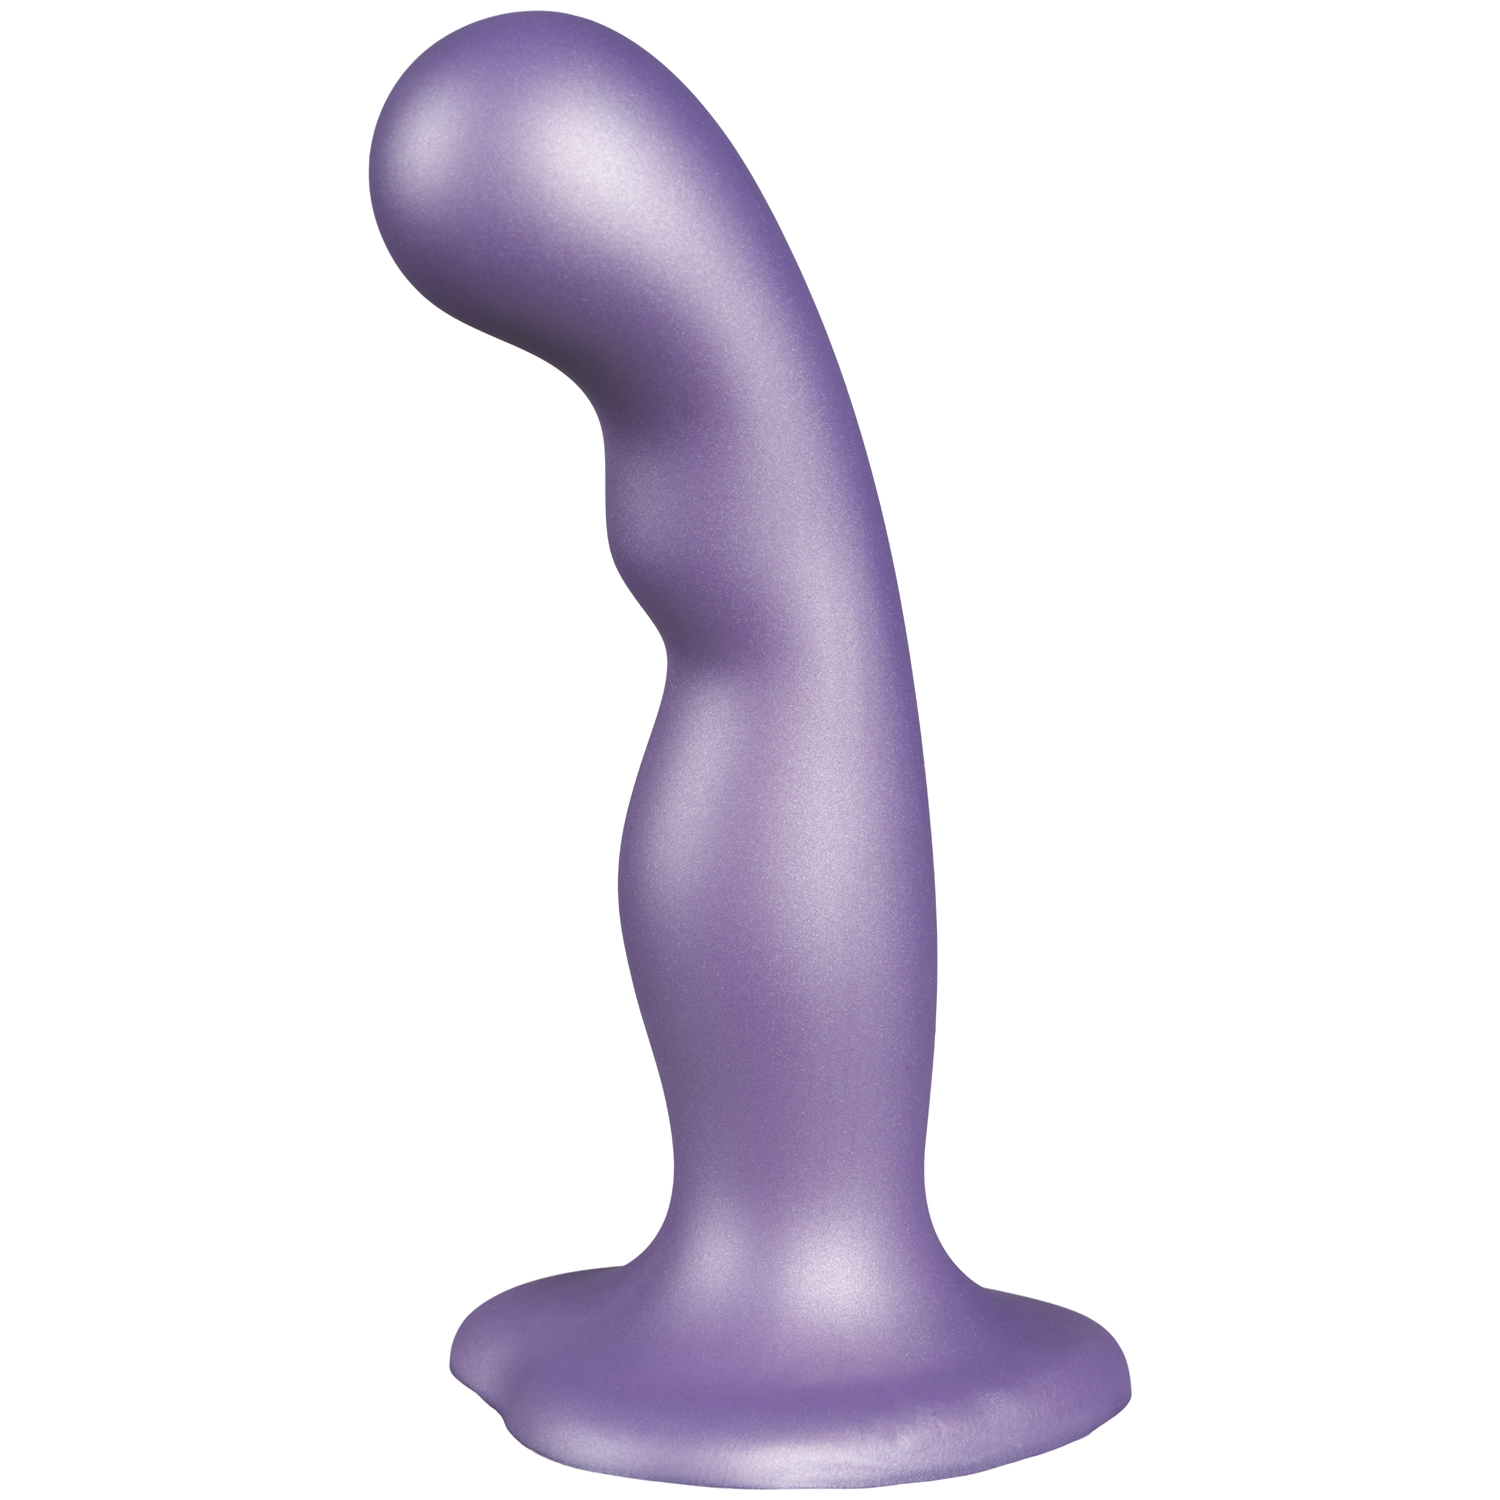 Strap-On-Me P&ampG Dildoplugg - Lila - XL